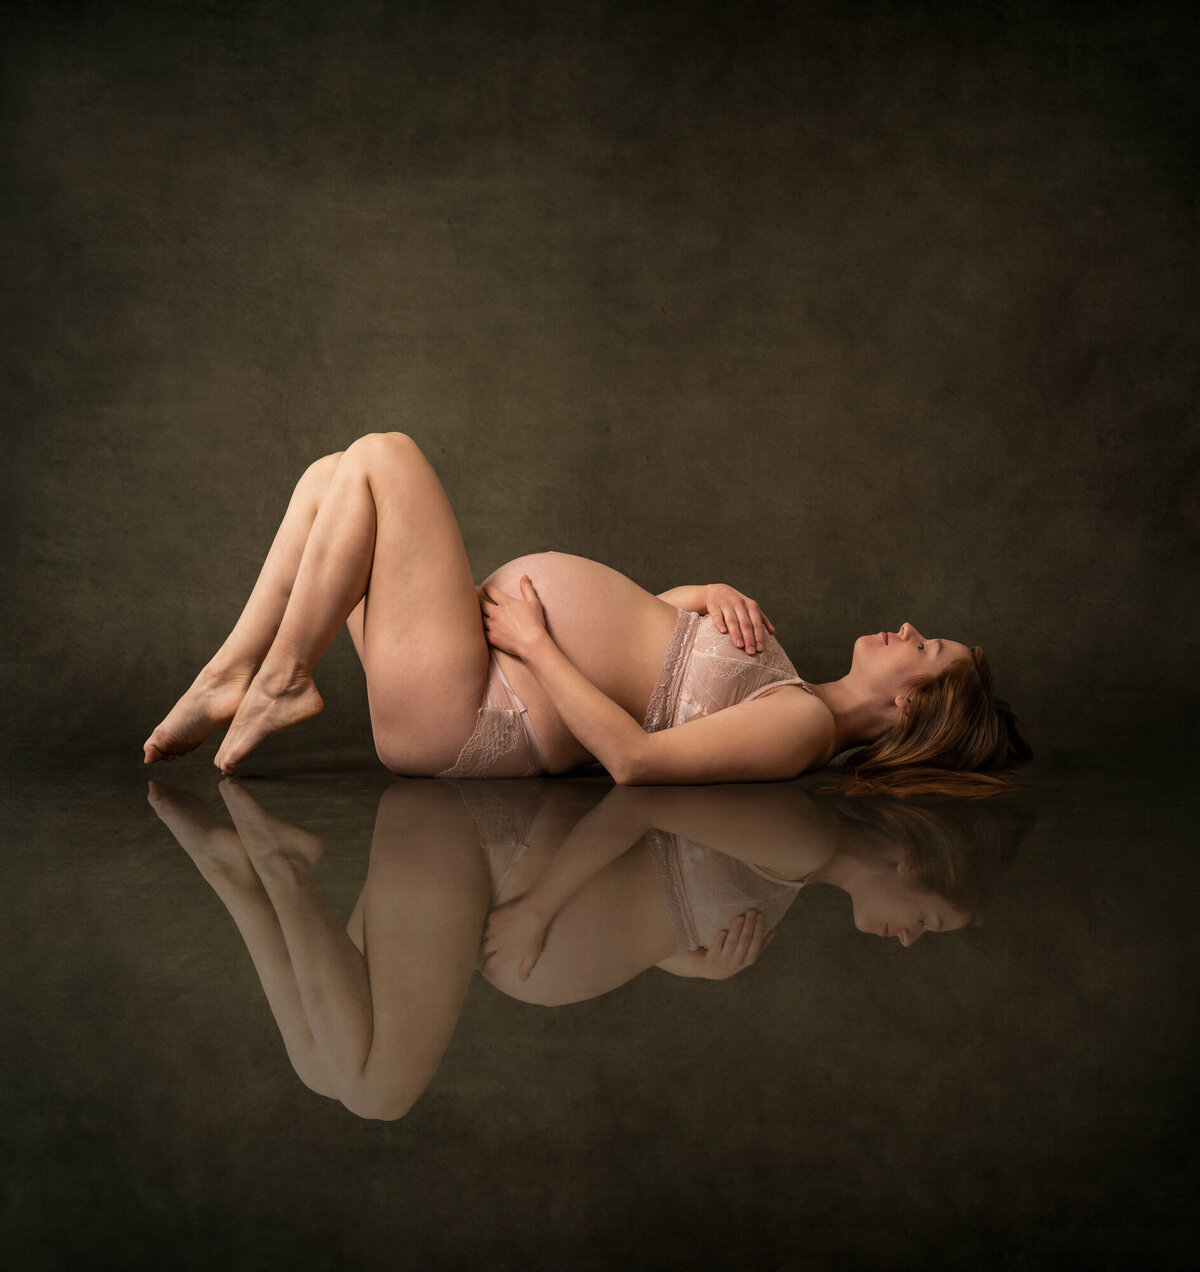 A beautiful mama to be in lingerie lays on the floor cradling her baby bump